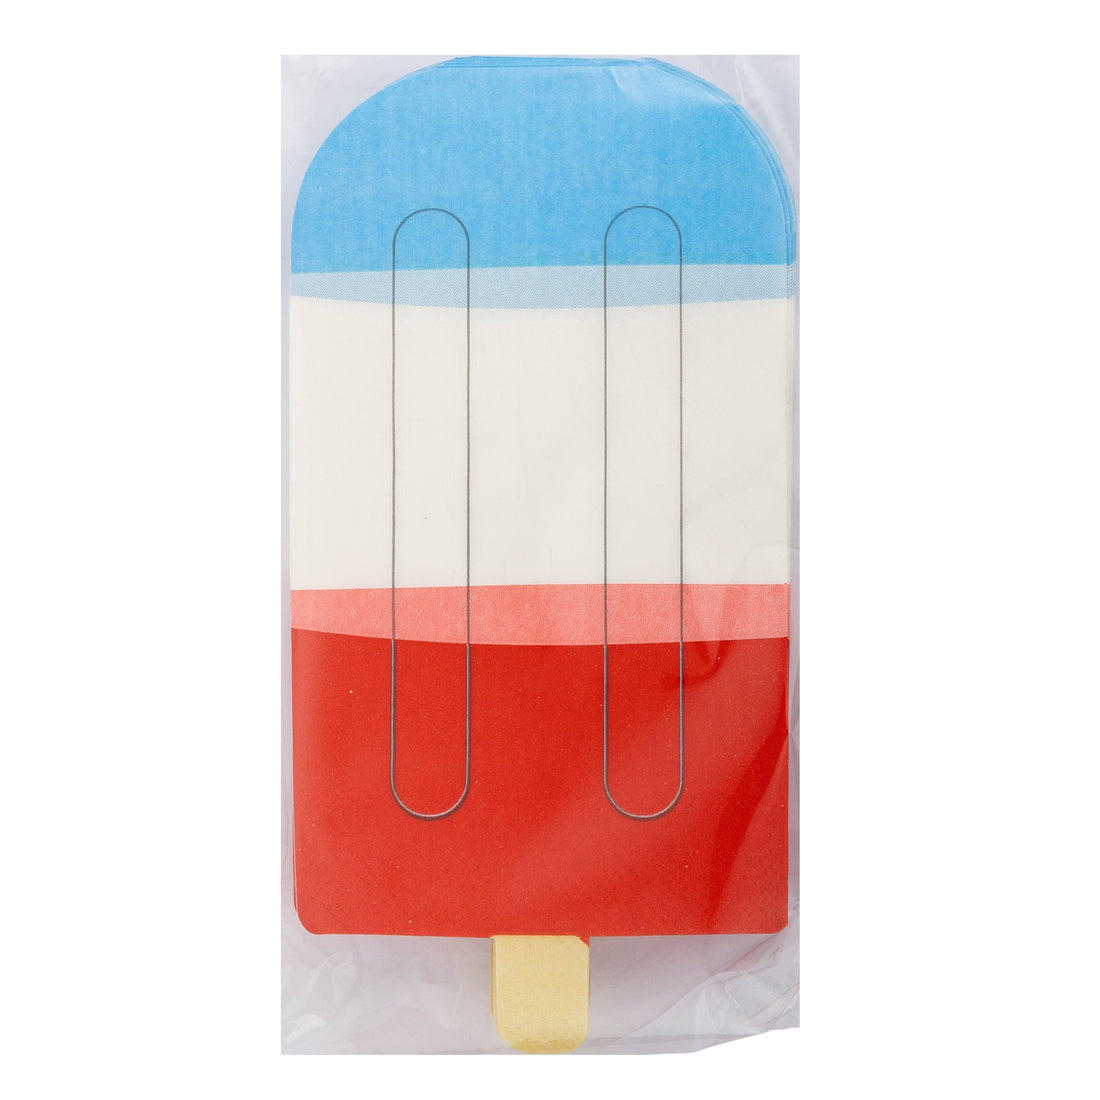 4&quot; x 7 ½&quot; Red, white &amp; blue ice pop shaped paper napkin wrapped in plastic on white background.